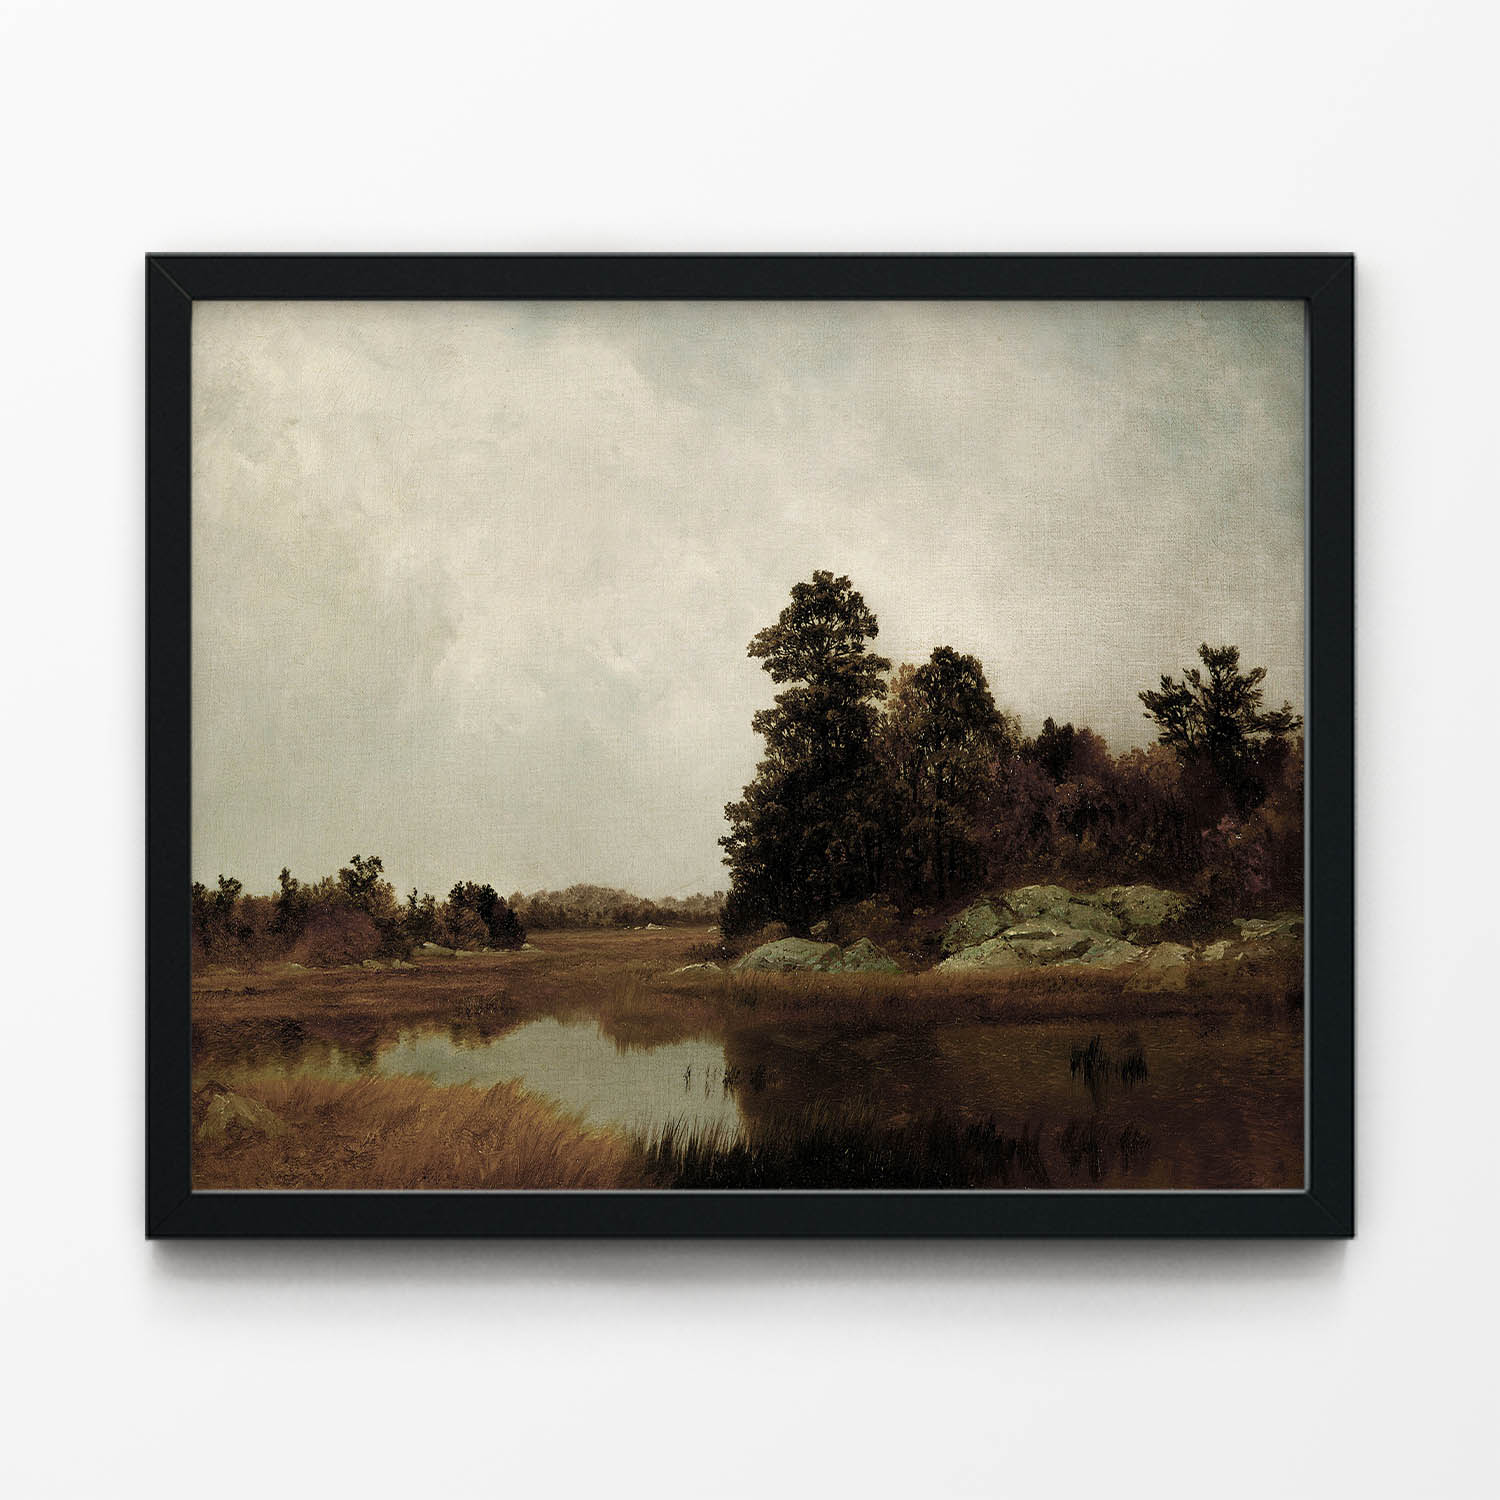 Autumn Art Print in Black Picture Frame